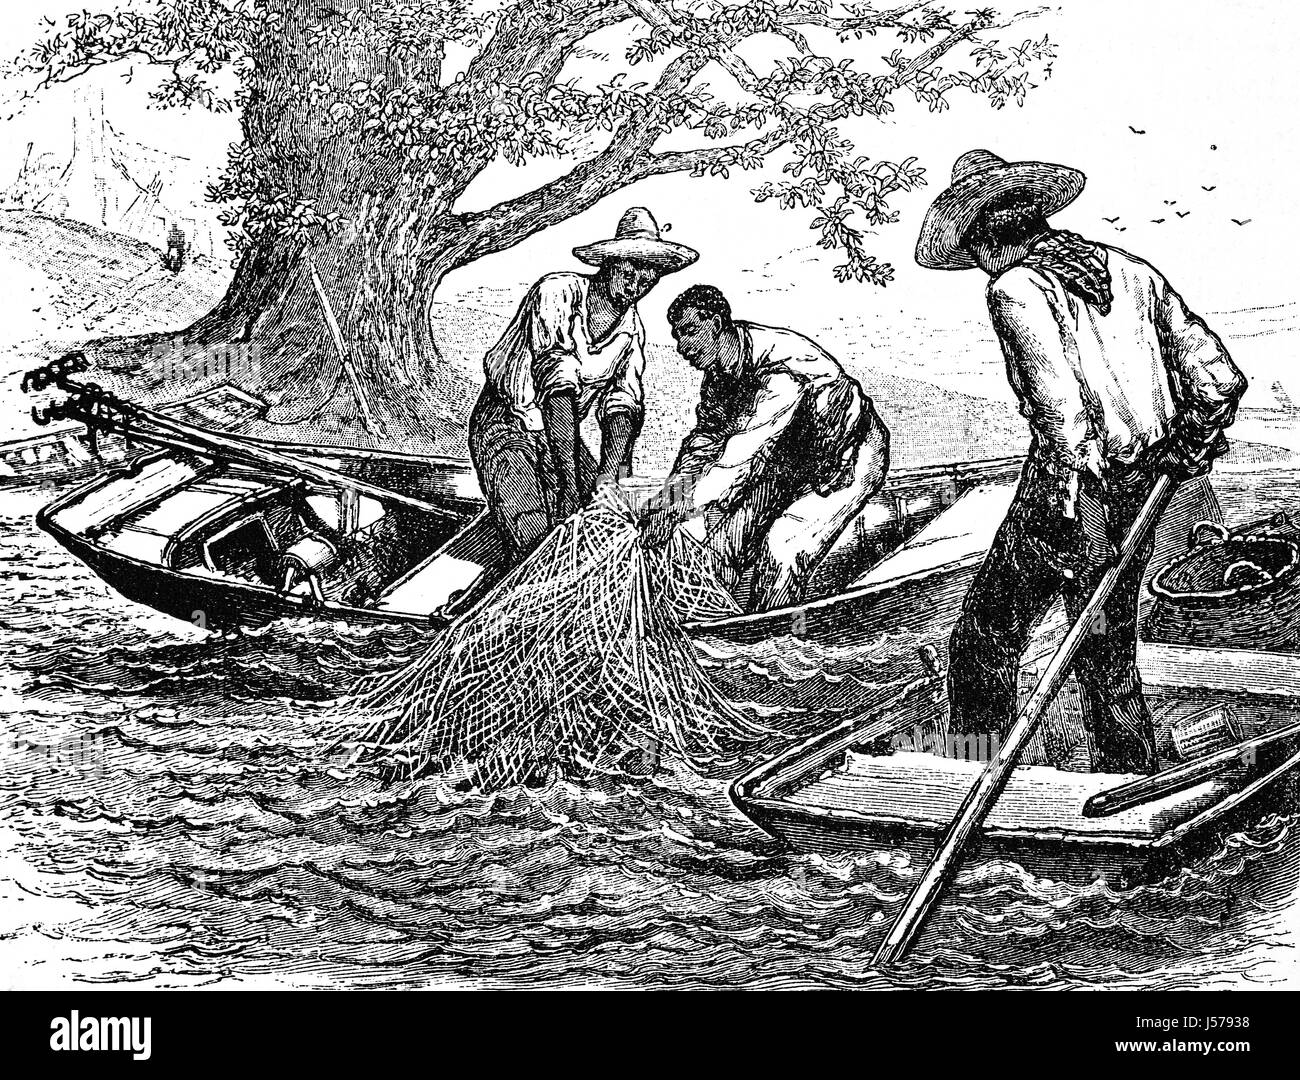 1879: Netting Diamond Back Terrapins Near Annapolis, Capital of the state of Maryland, United States of America Stock Photo